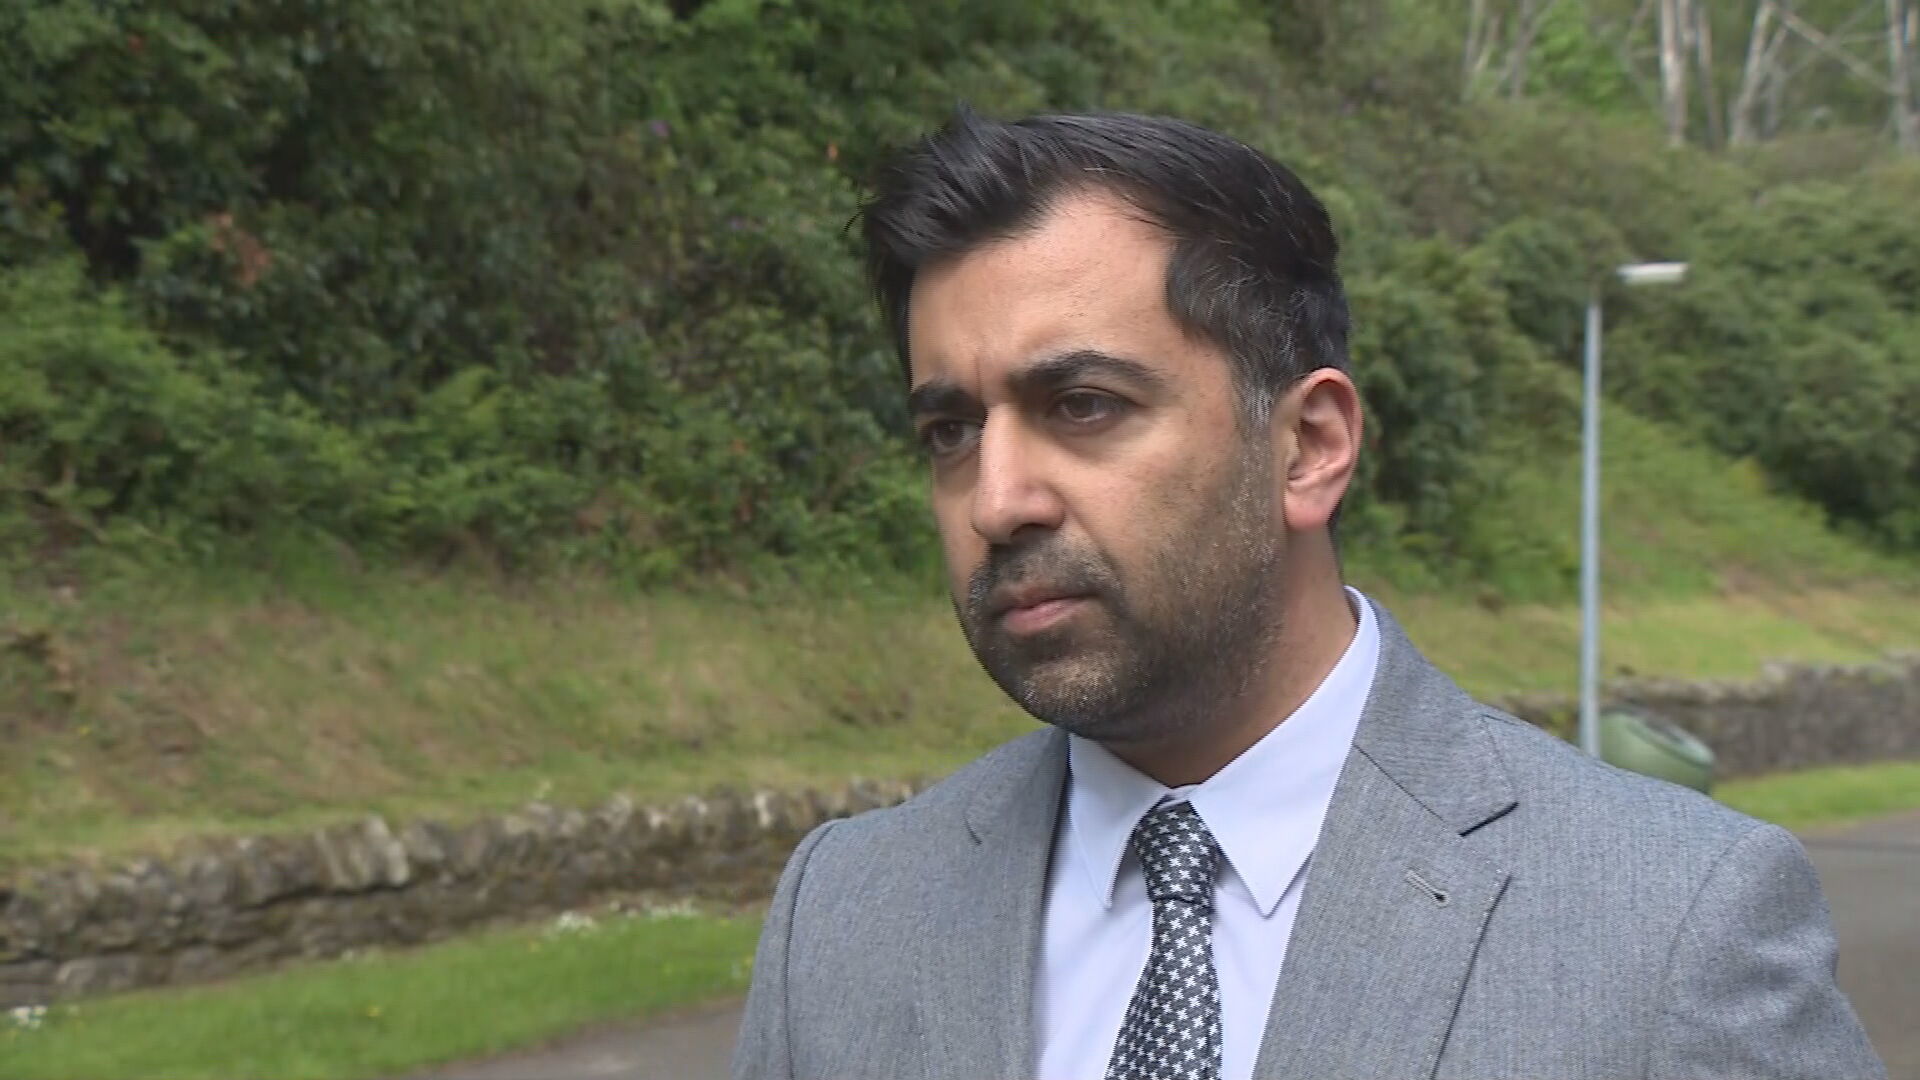 Humza Yousaf said he was being 'consistent' by not suspending Nicola Sturgeon.